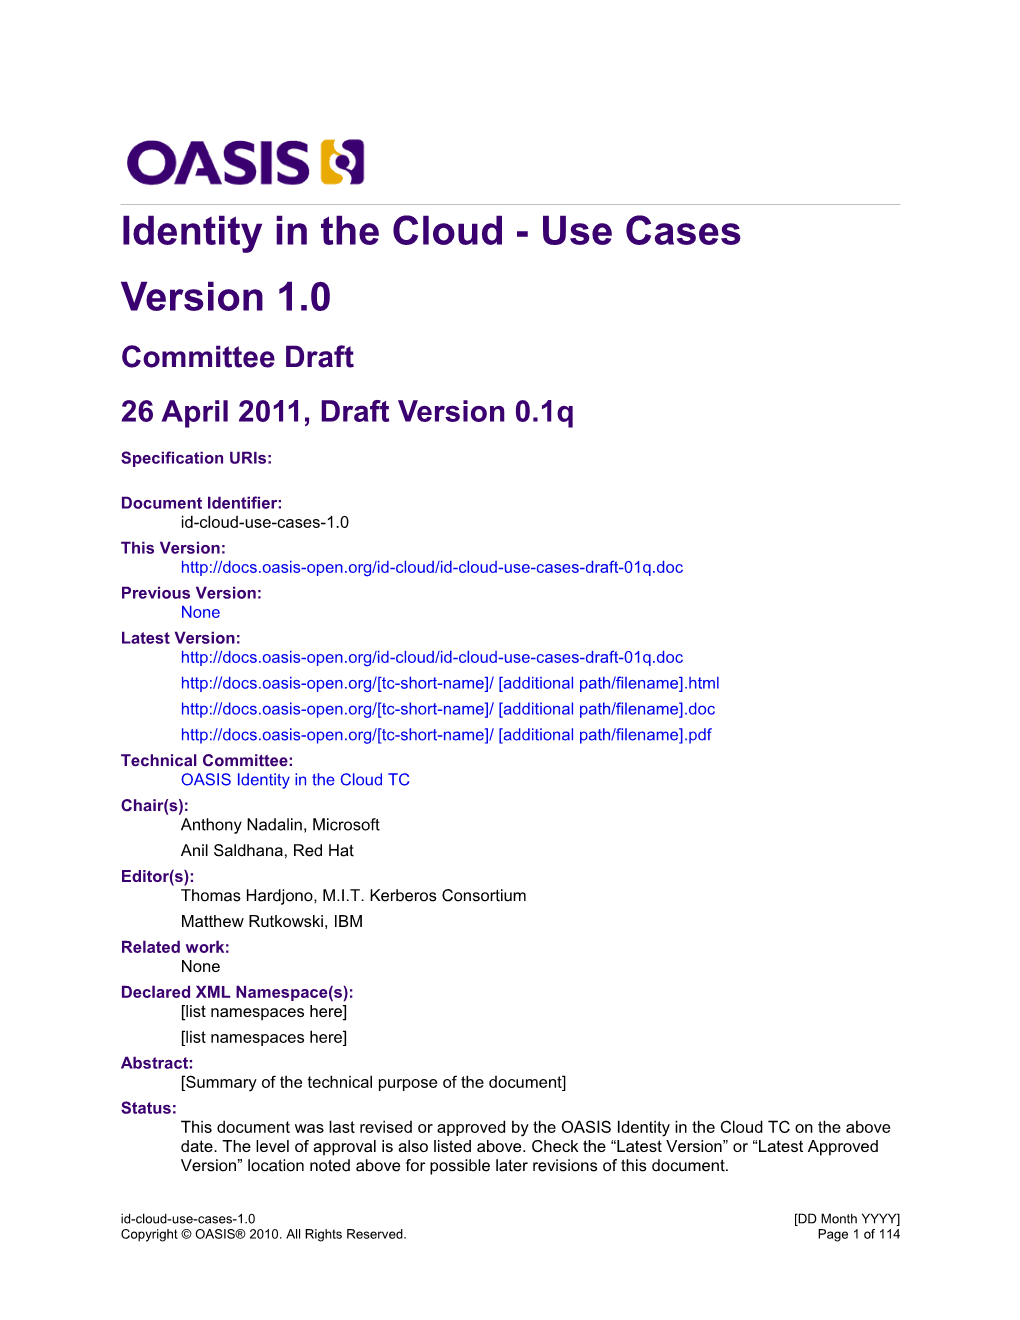 OASIS Idcloud TC - Use Cases Document